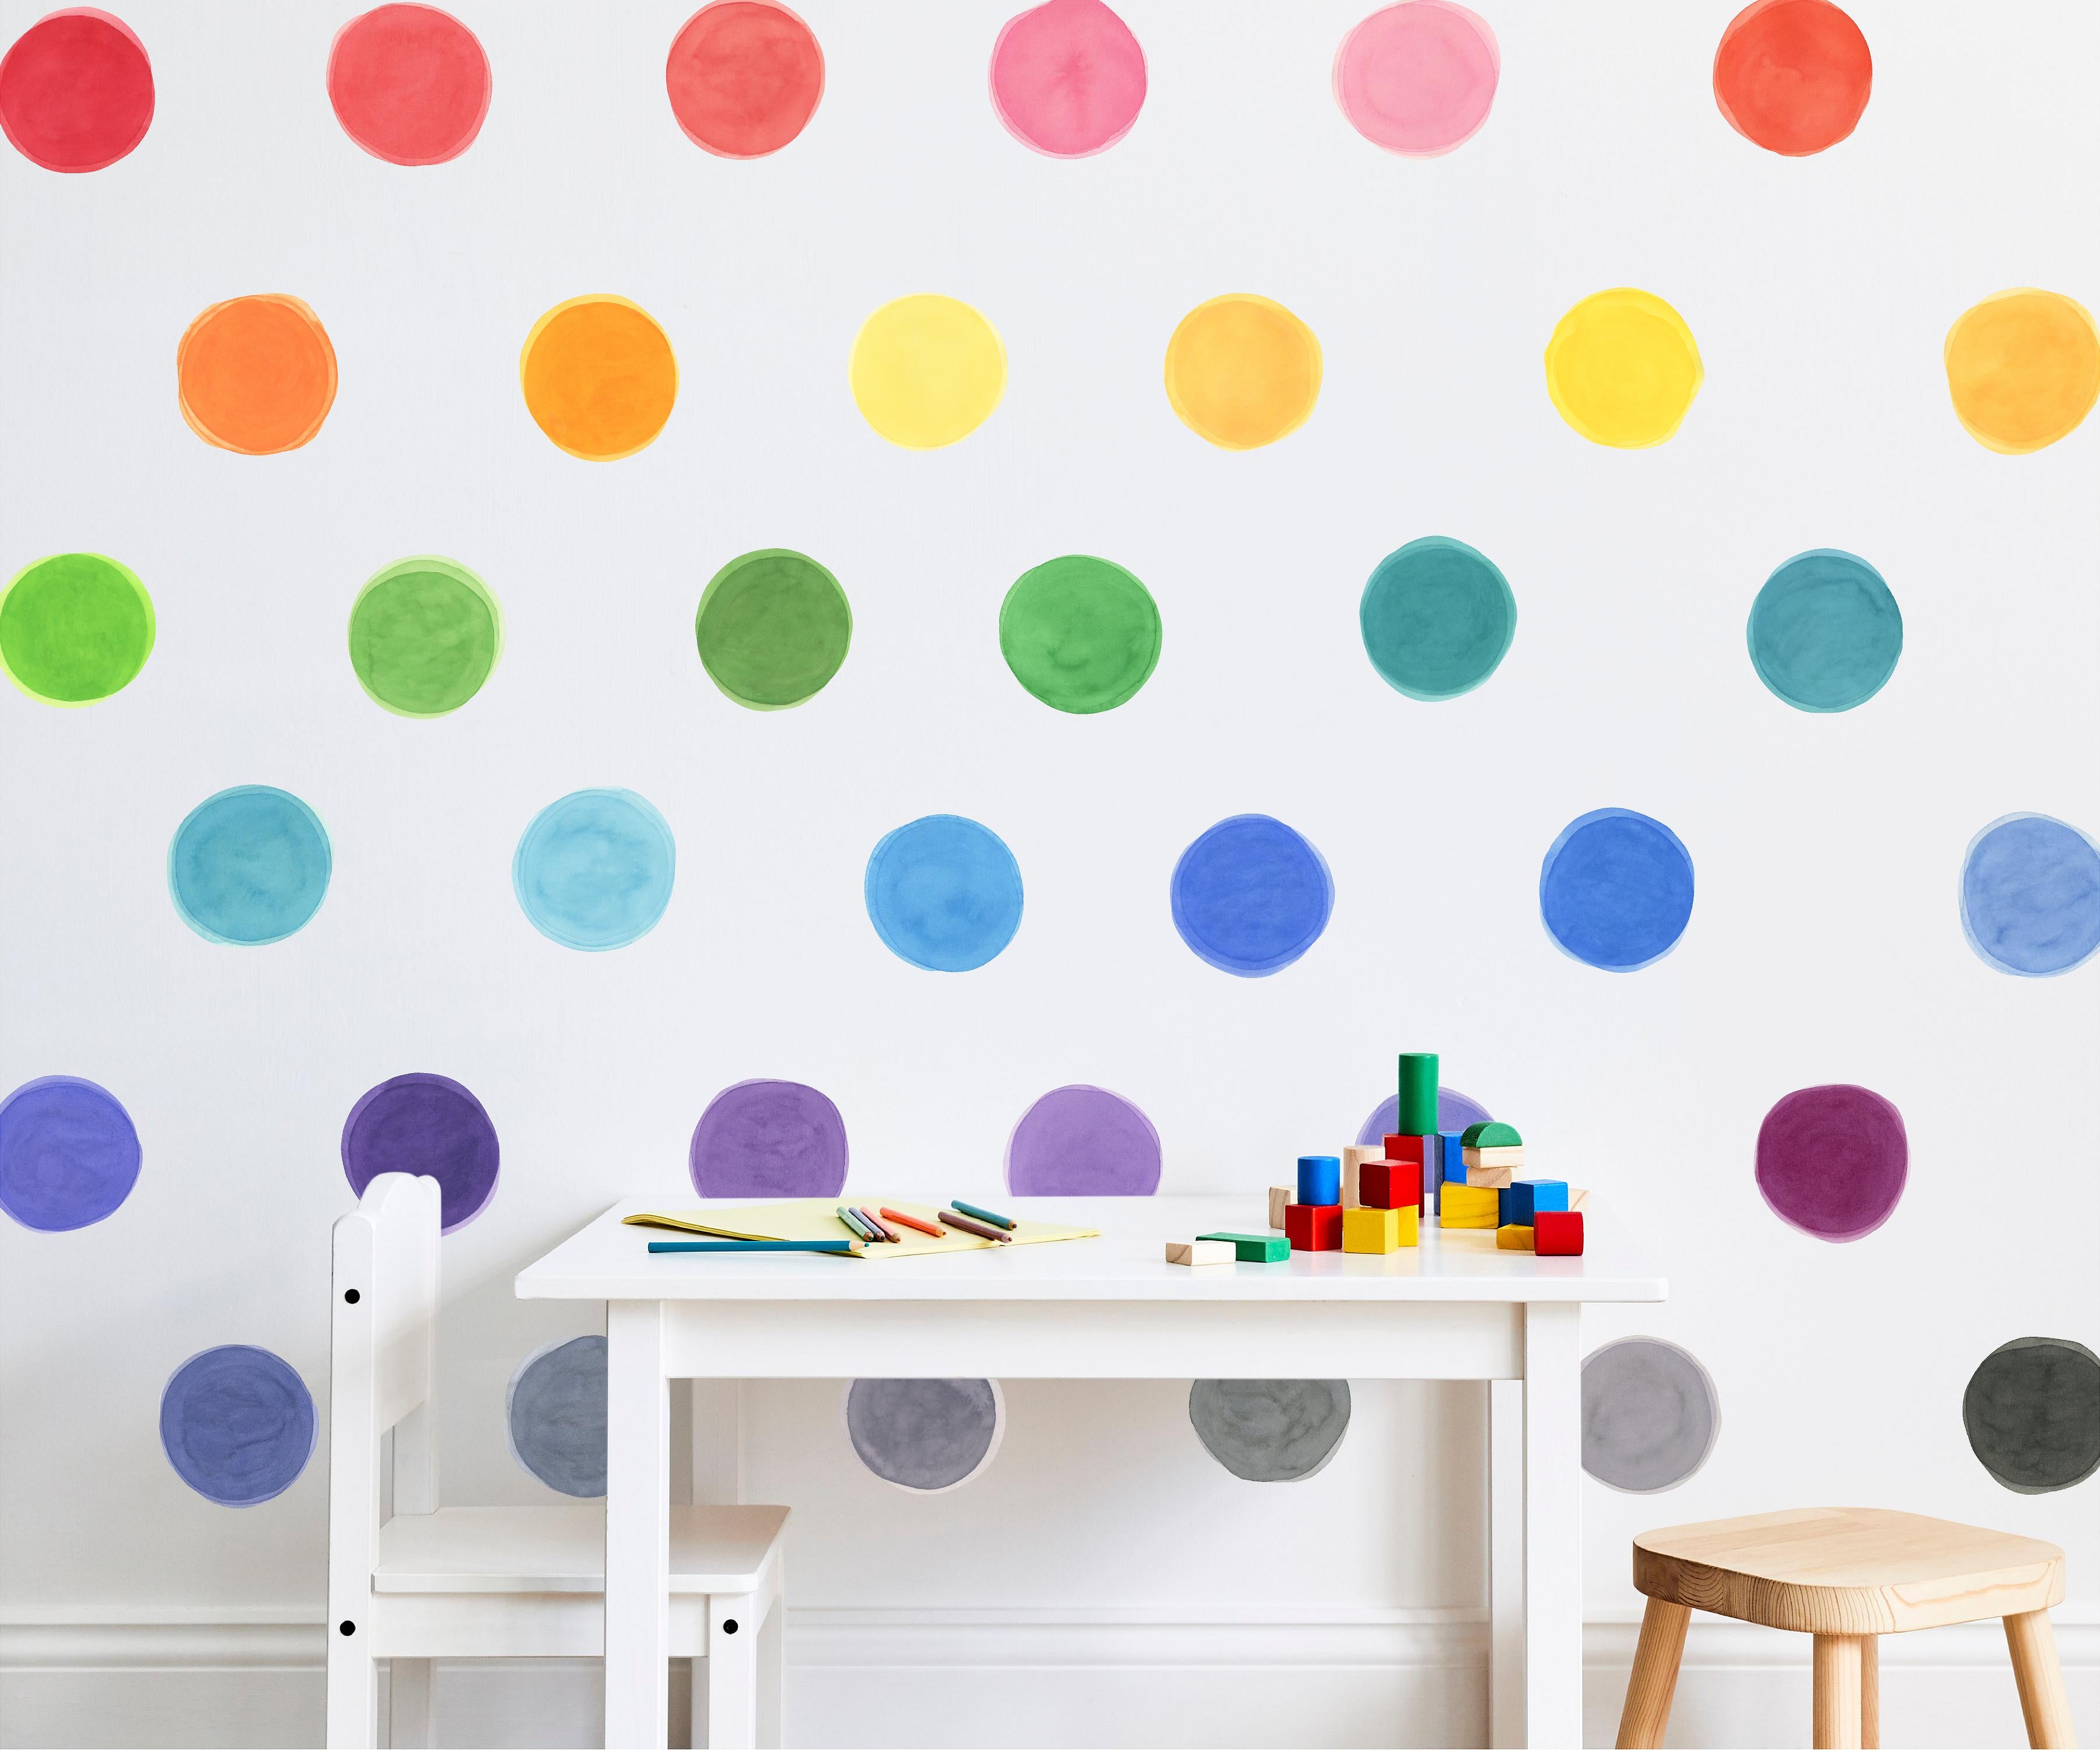 MEDIUM Watercolor Rainbow Dots Wall Decal Set • 36 Dots • Removable Fabric Wall Stickers • Colors of the Rainbow Collection